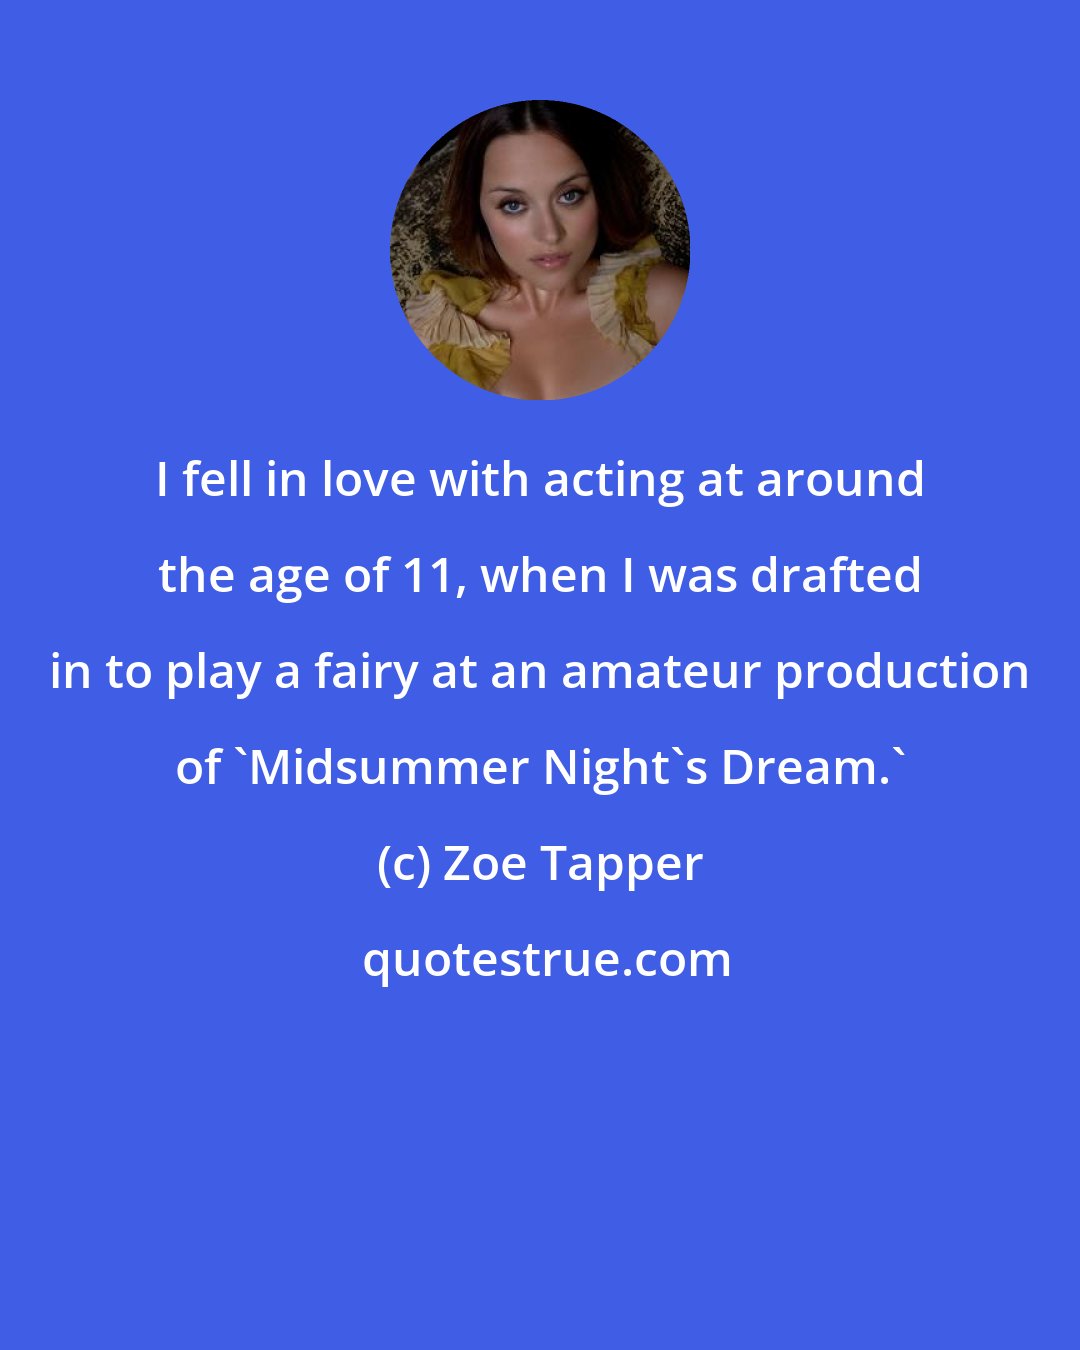 Zoe Tapper: I fell in love with acting at around the age of 11, when I was drafted in to play a fairy at an amateur production of 'Midsummer Night's Dream.'